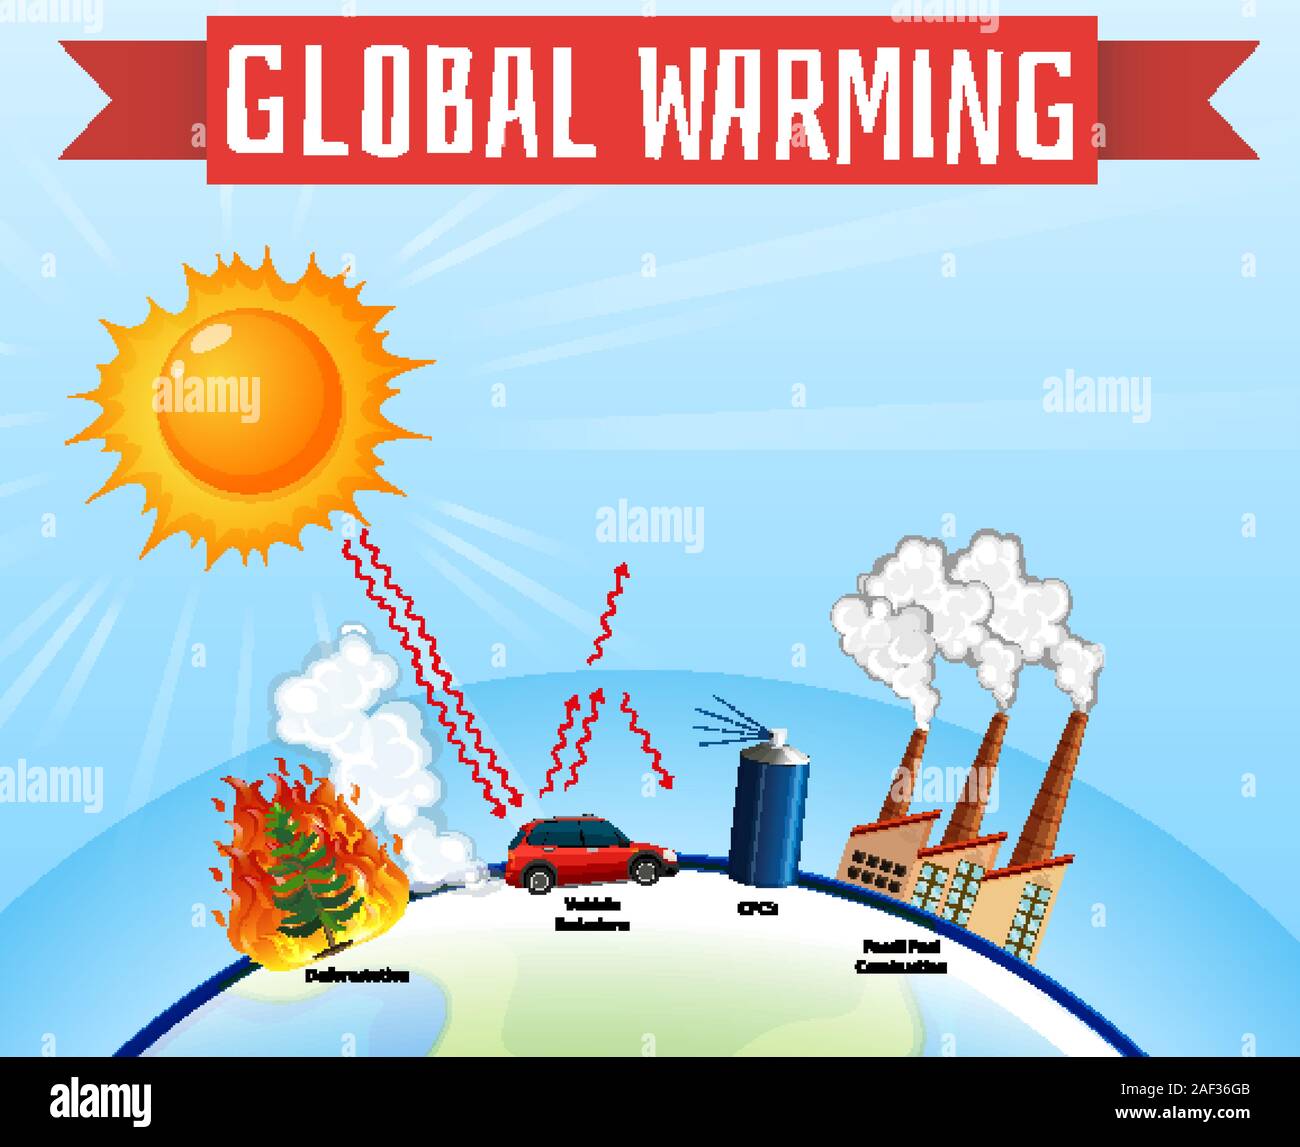 Diagram showing global warming on earth illustration Stock Vector